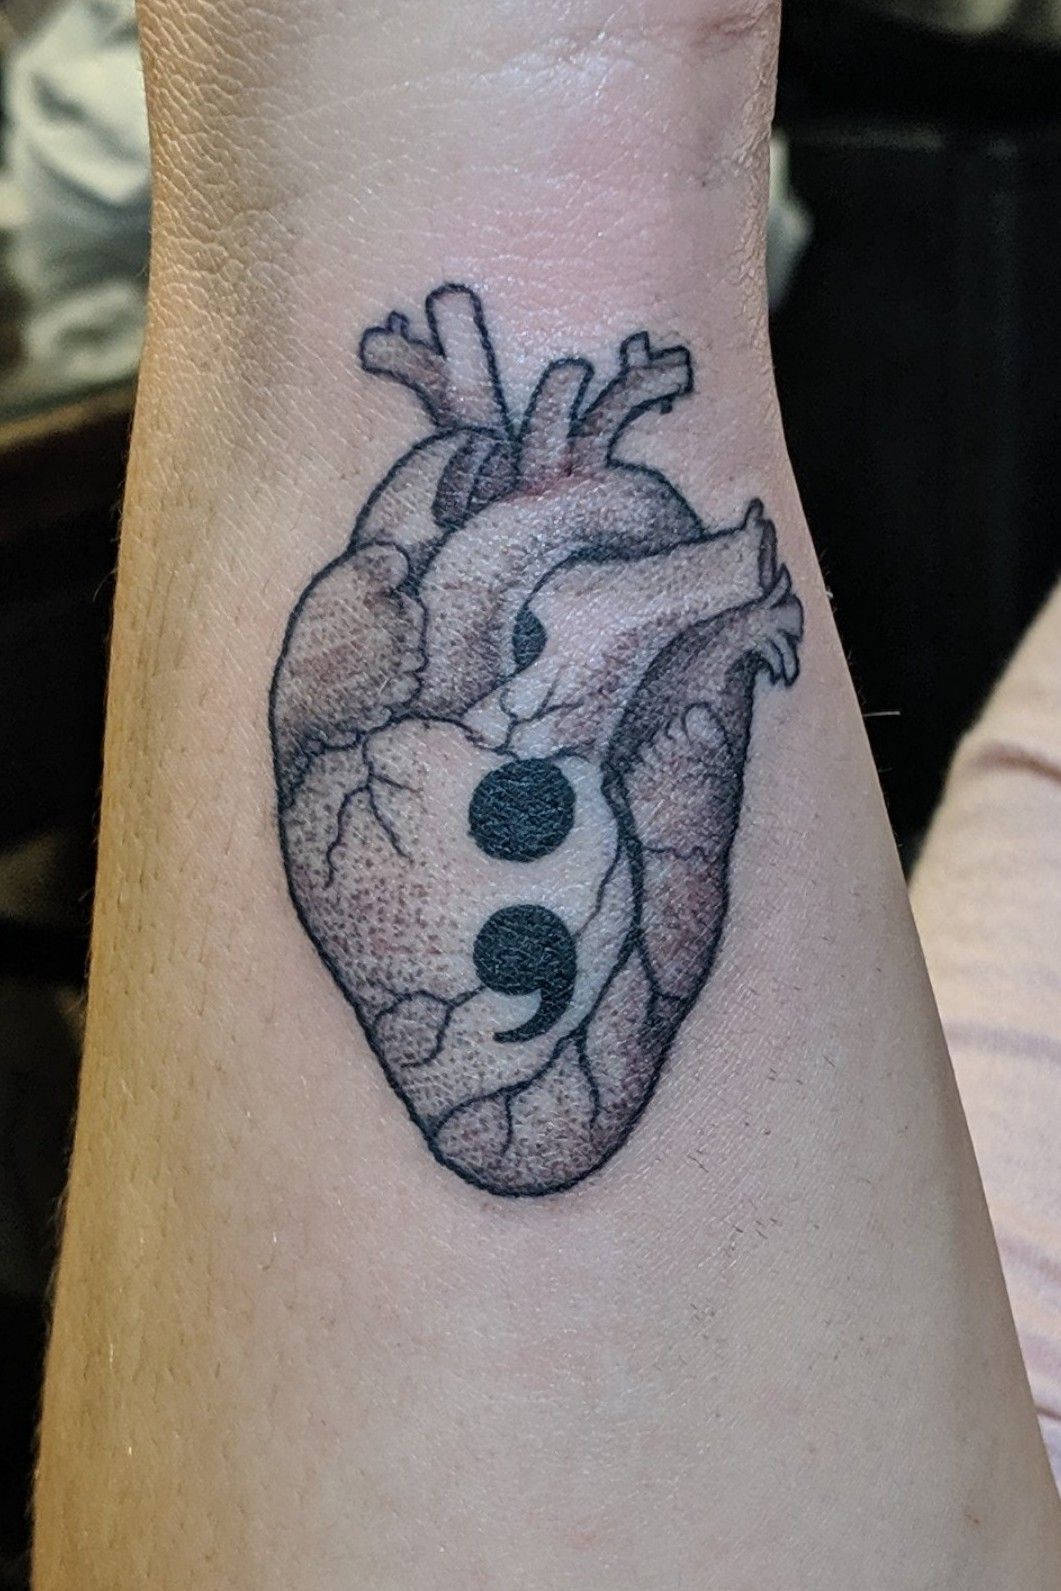 Semi colon heart done by Steven Anderson at 252 tattoo in Columbia station  OH  rtattoos